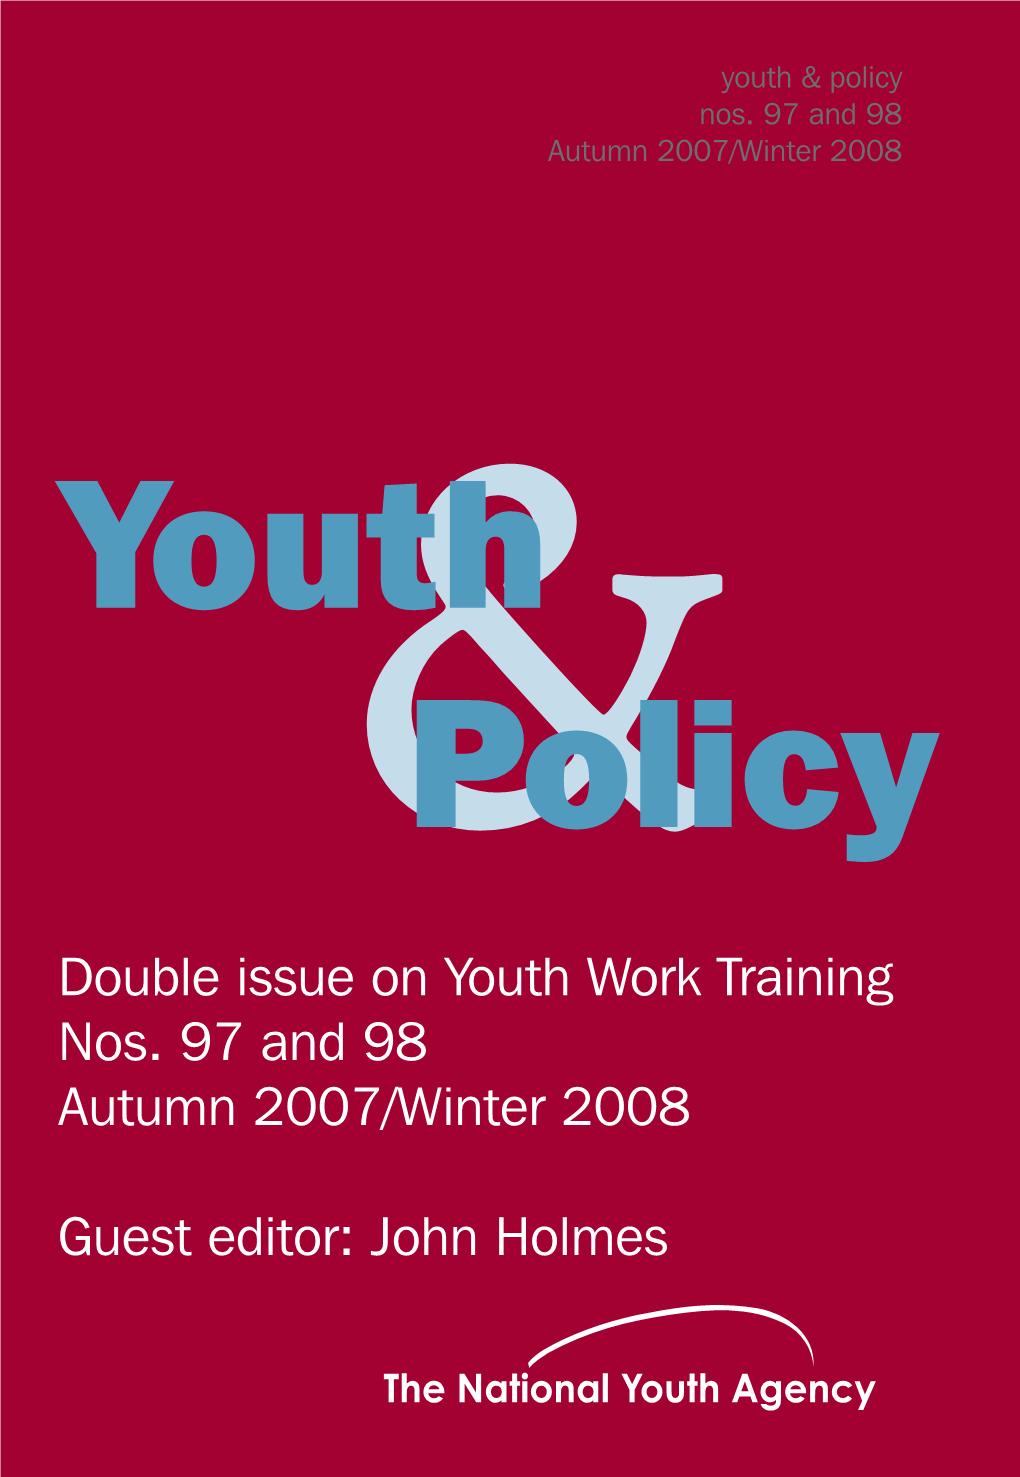 Double Issue on Youth Work Training Nos. 97 and 98 Autumn 2007